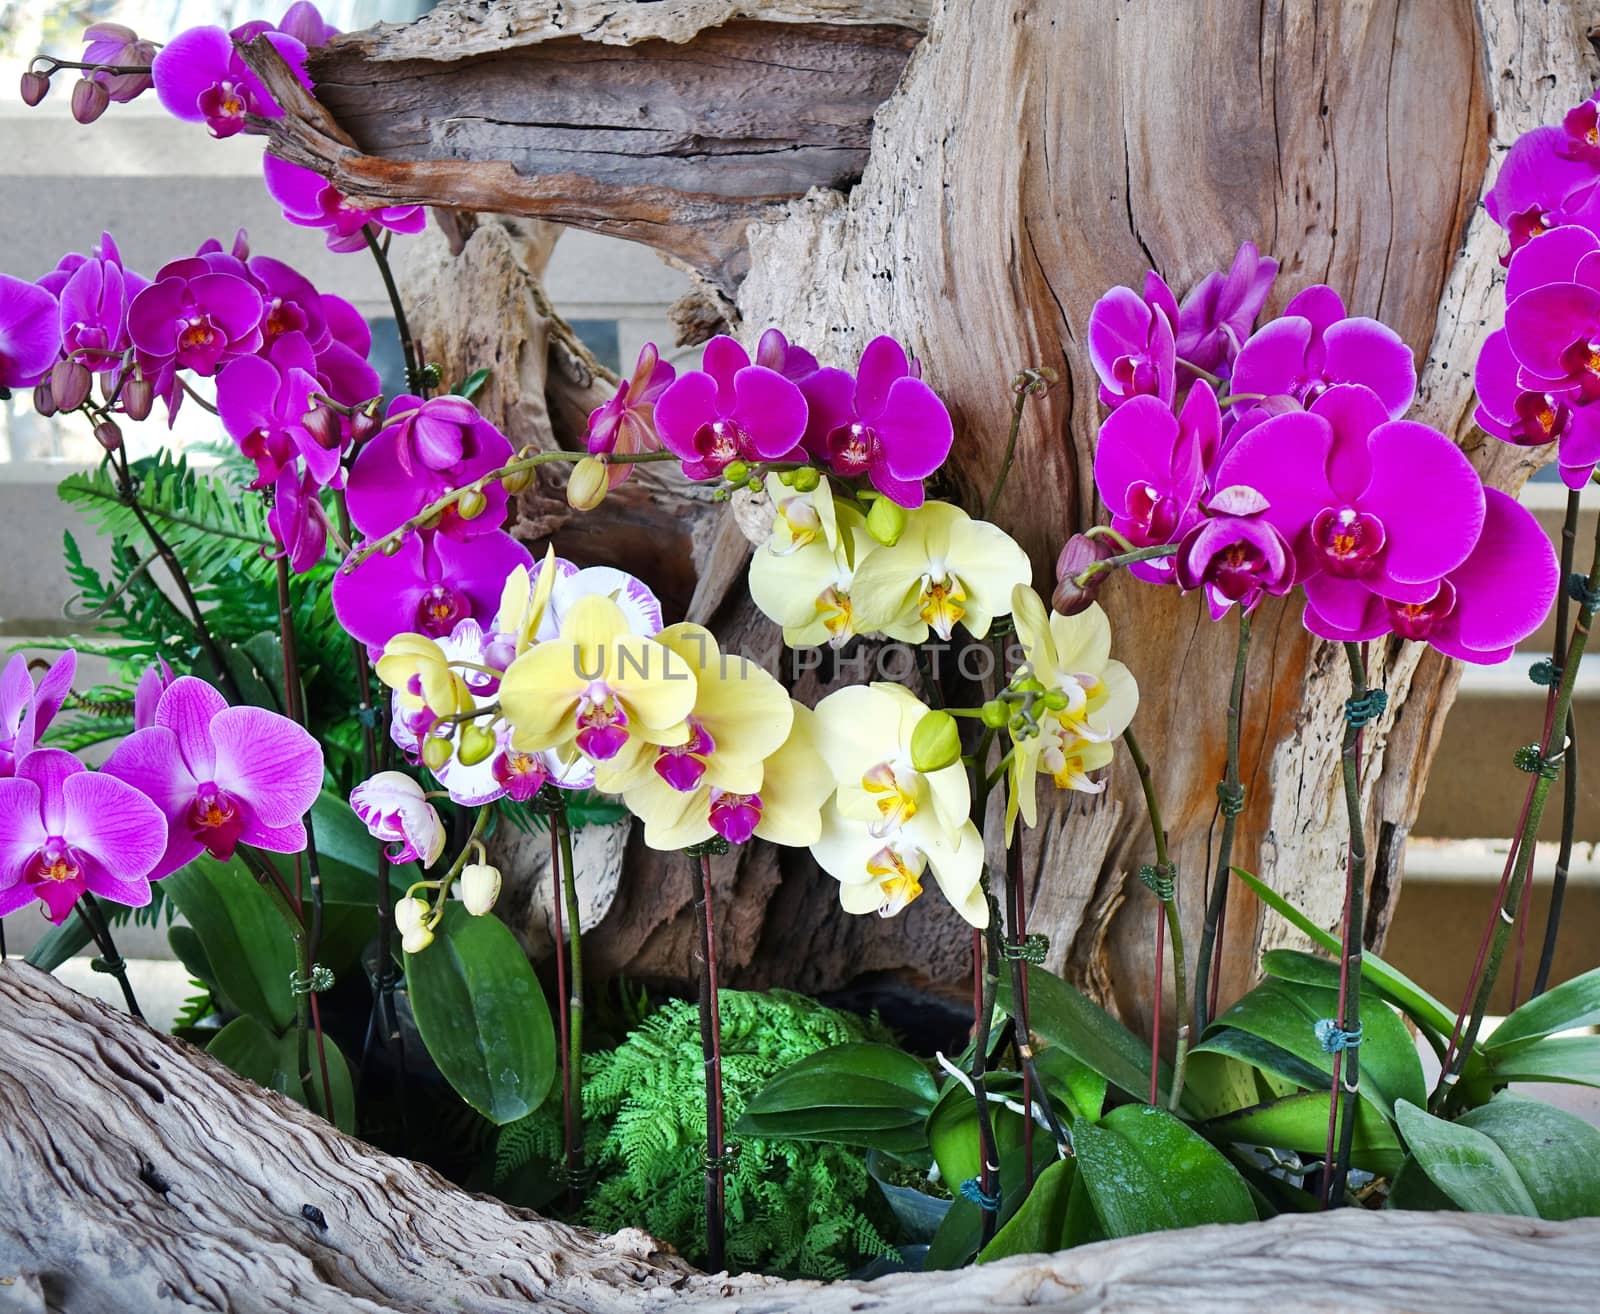 Purple and white and yellow blossoms of the Phalaenopsis orchid family